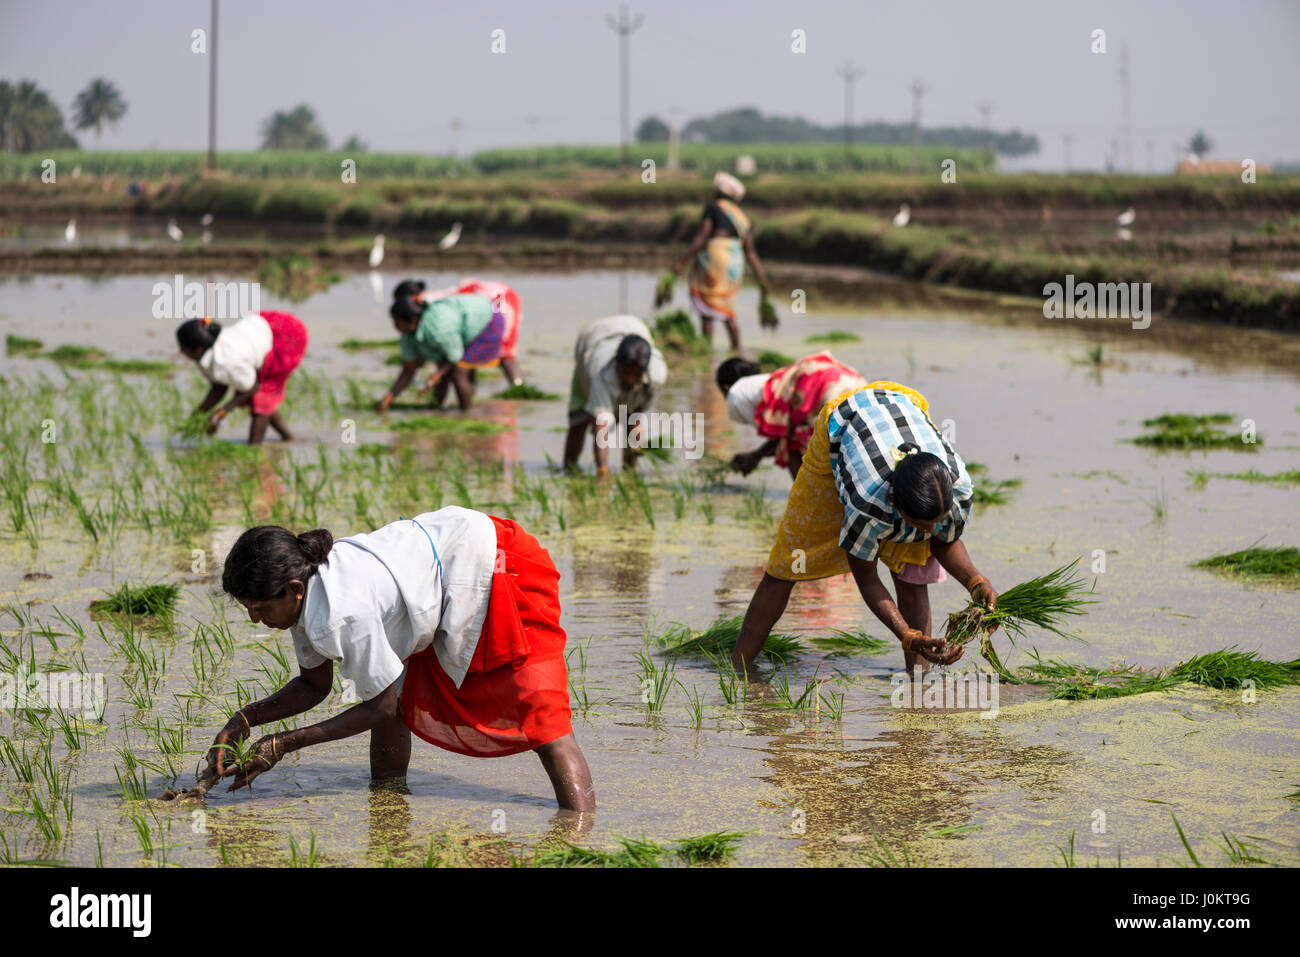 Rice cultivation, workers in the rice paddy, near Madurai, Tamil Nadu, India Stock Photo